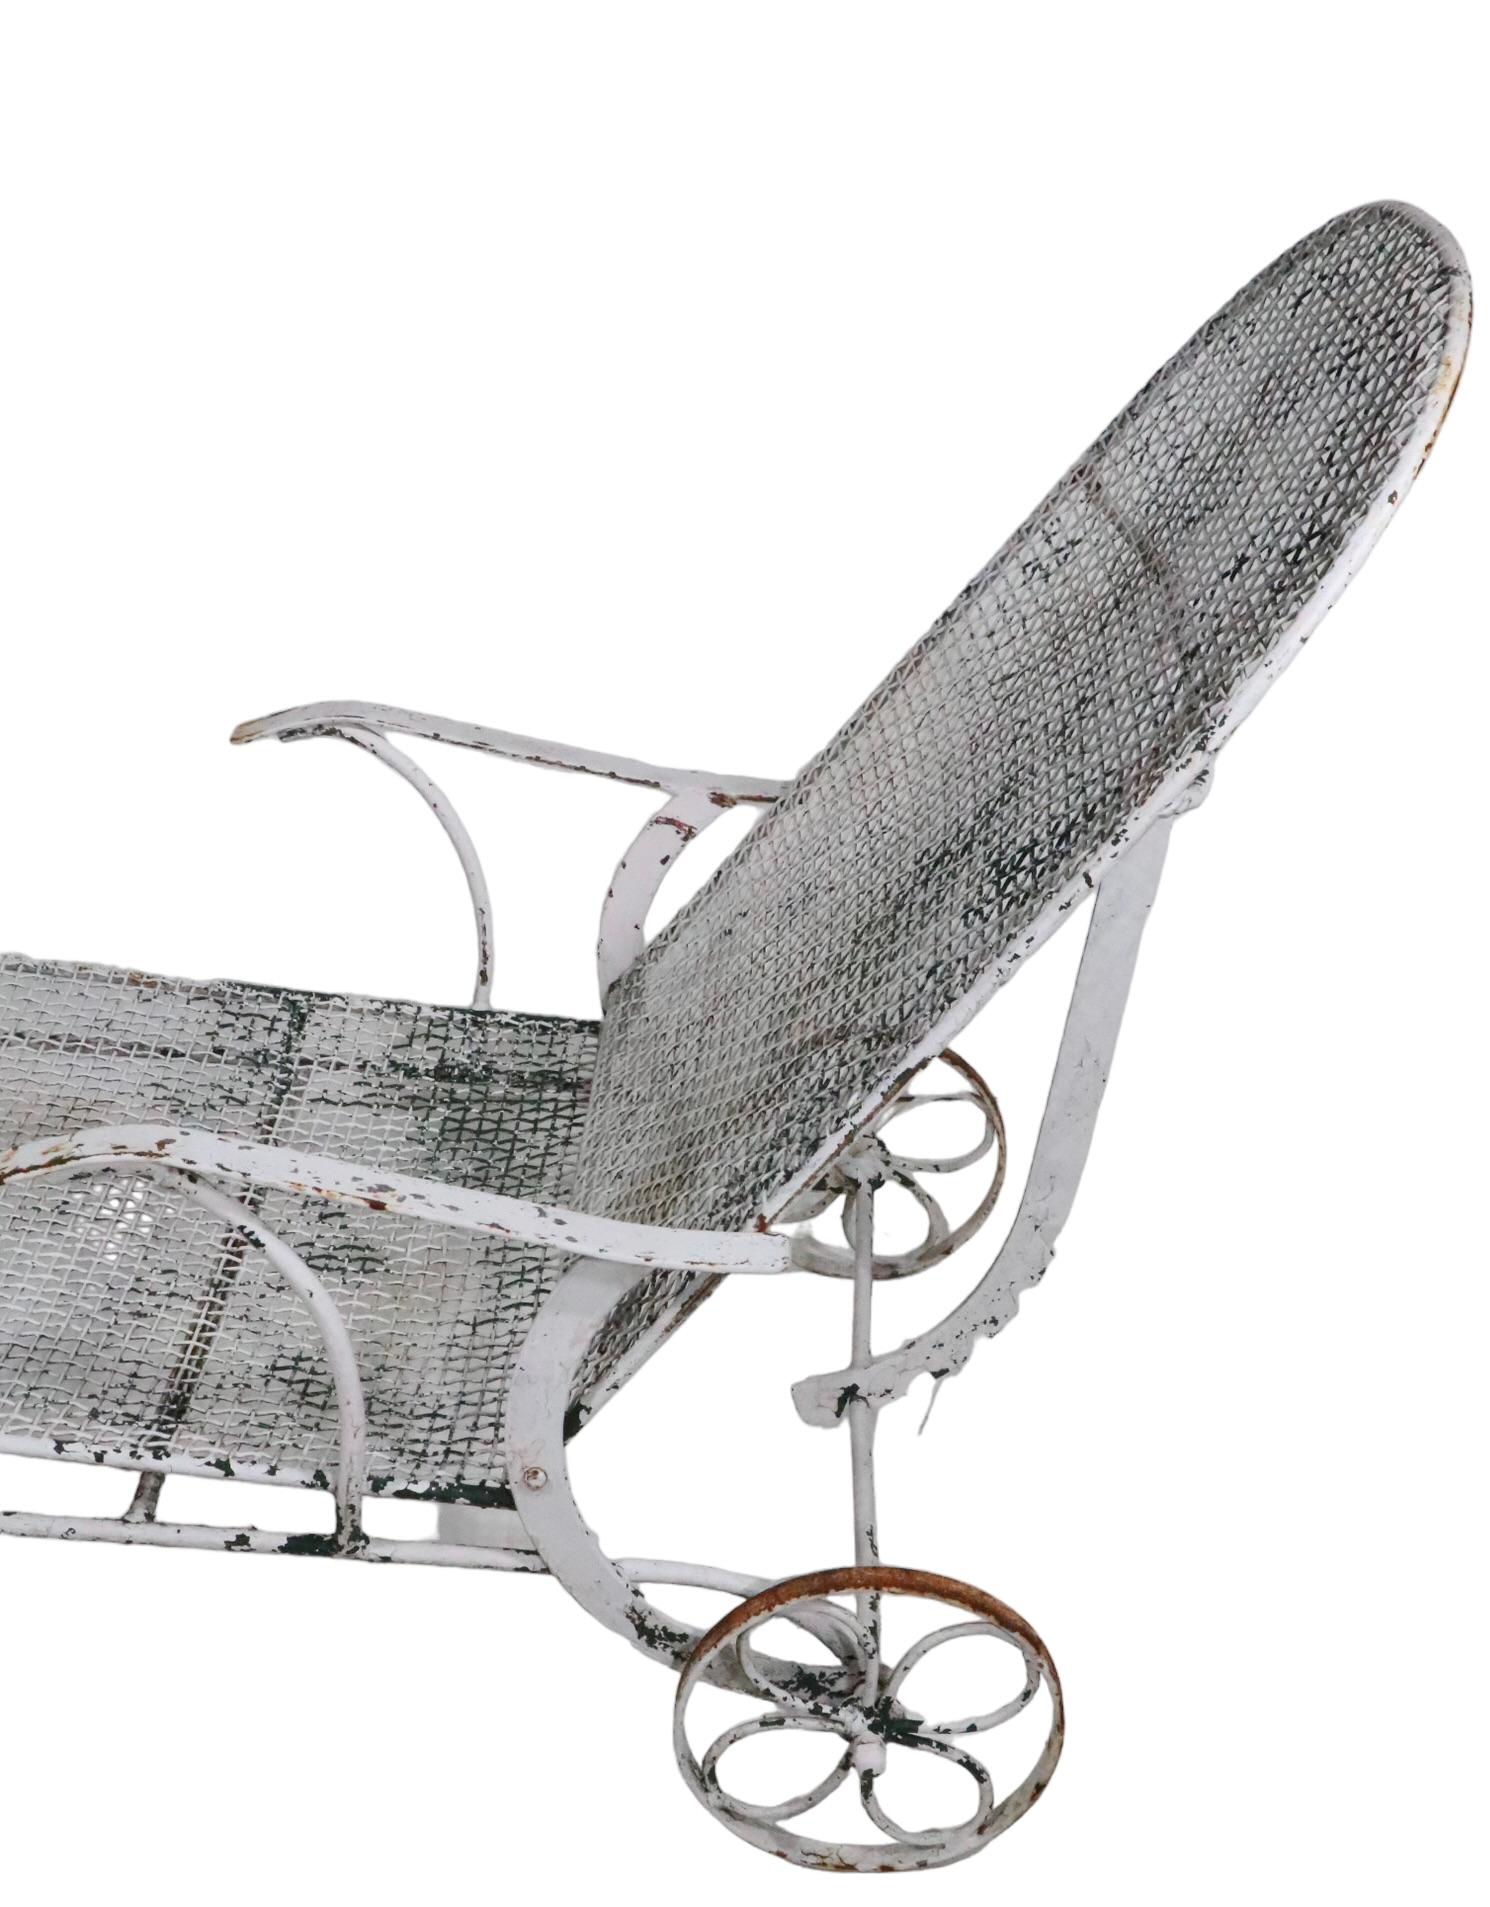  Wrought Iron Garden Poolside Patio Woodard Sculptura Chaise Lounge c. 1950's For Sale 5